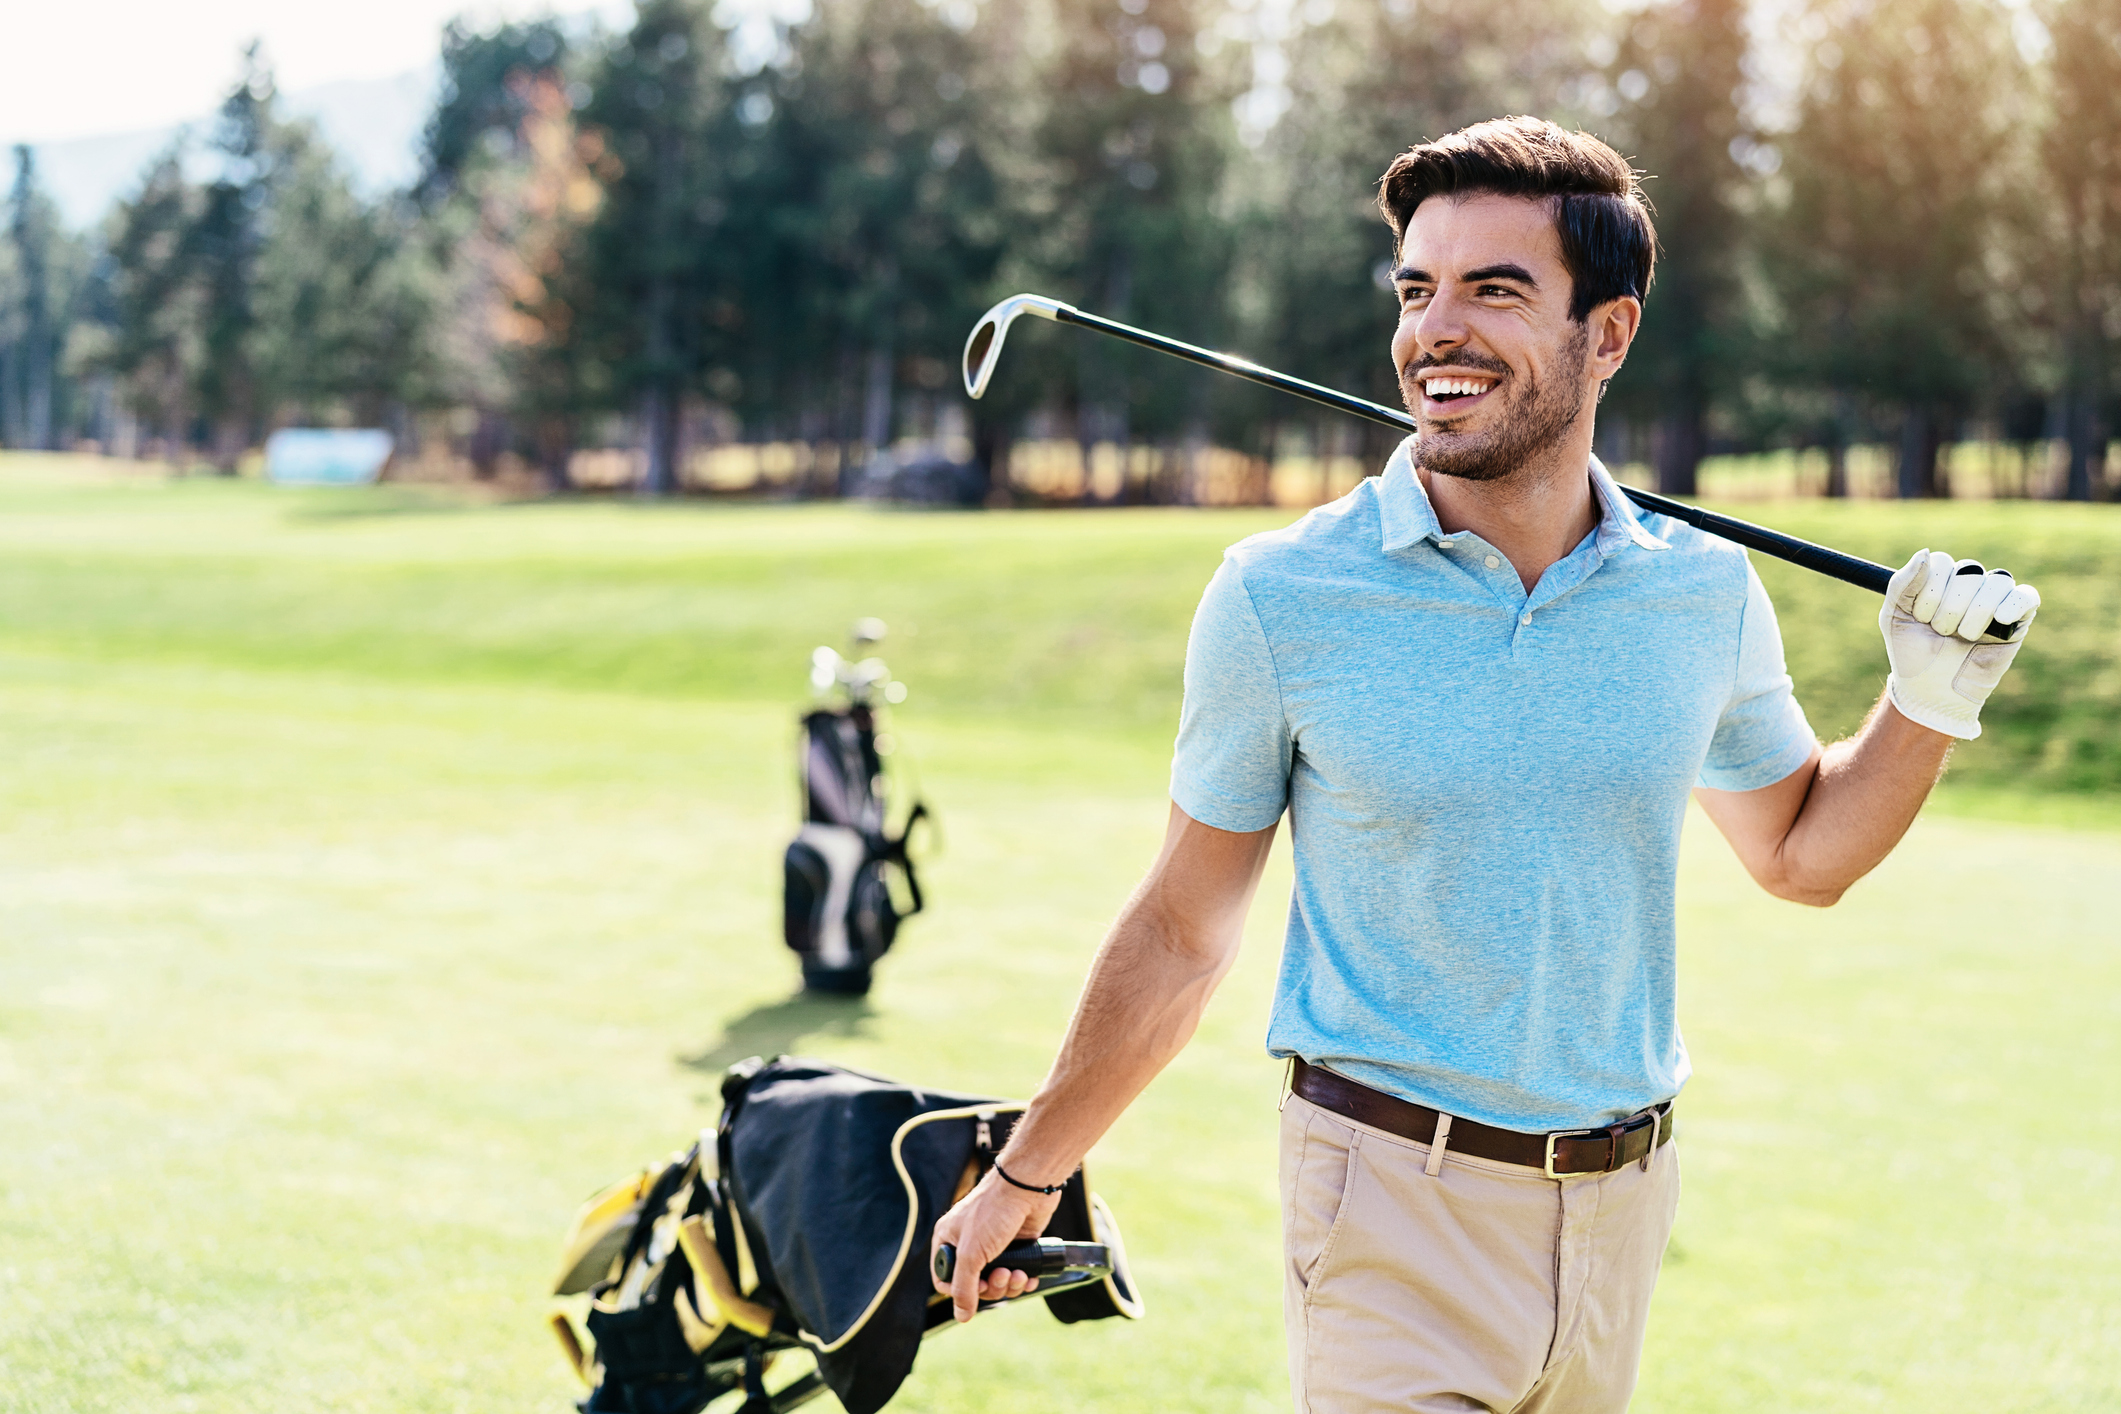 Smiling golf player walking on the course